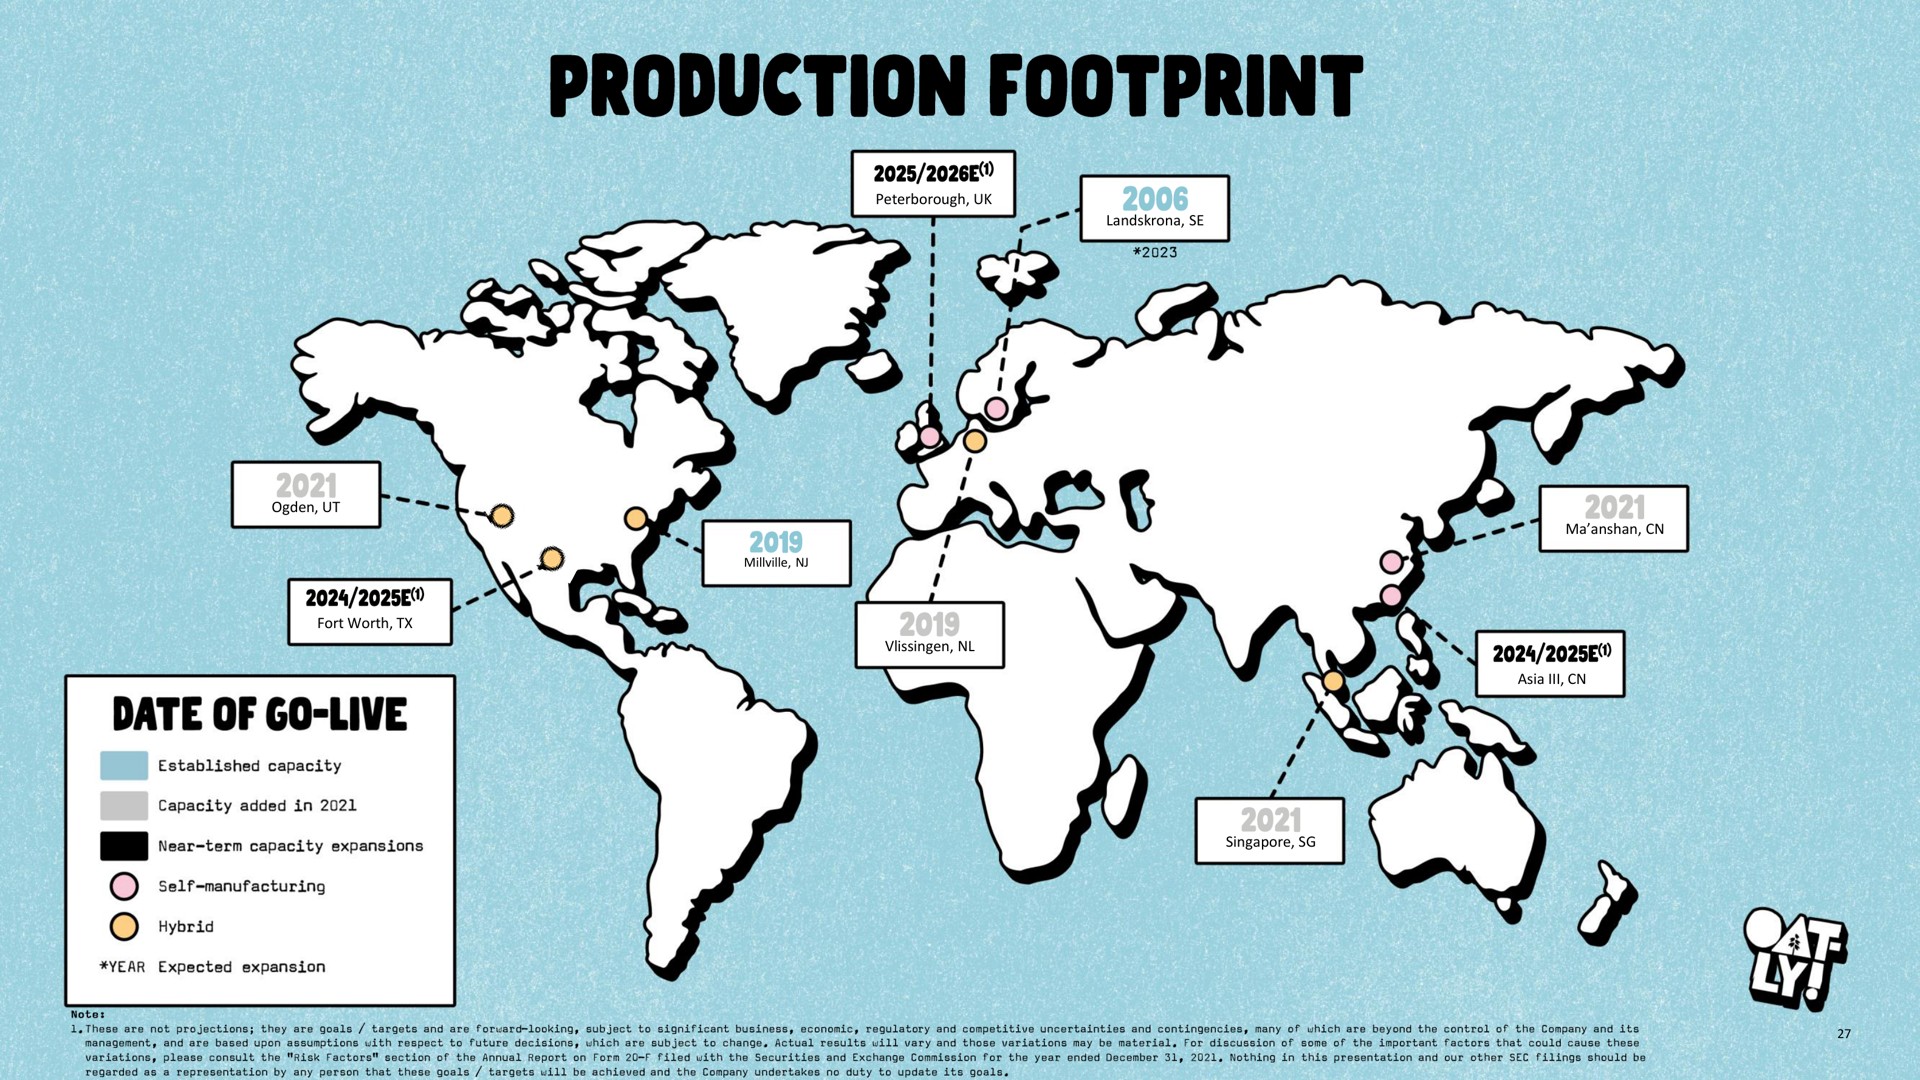 fort worth production footprint | Oatly